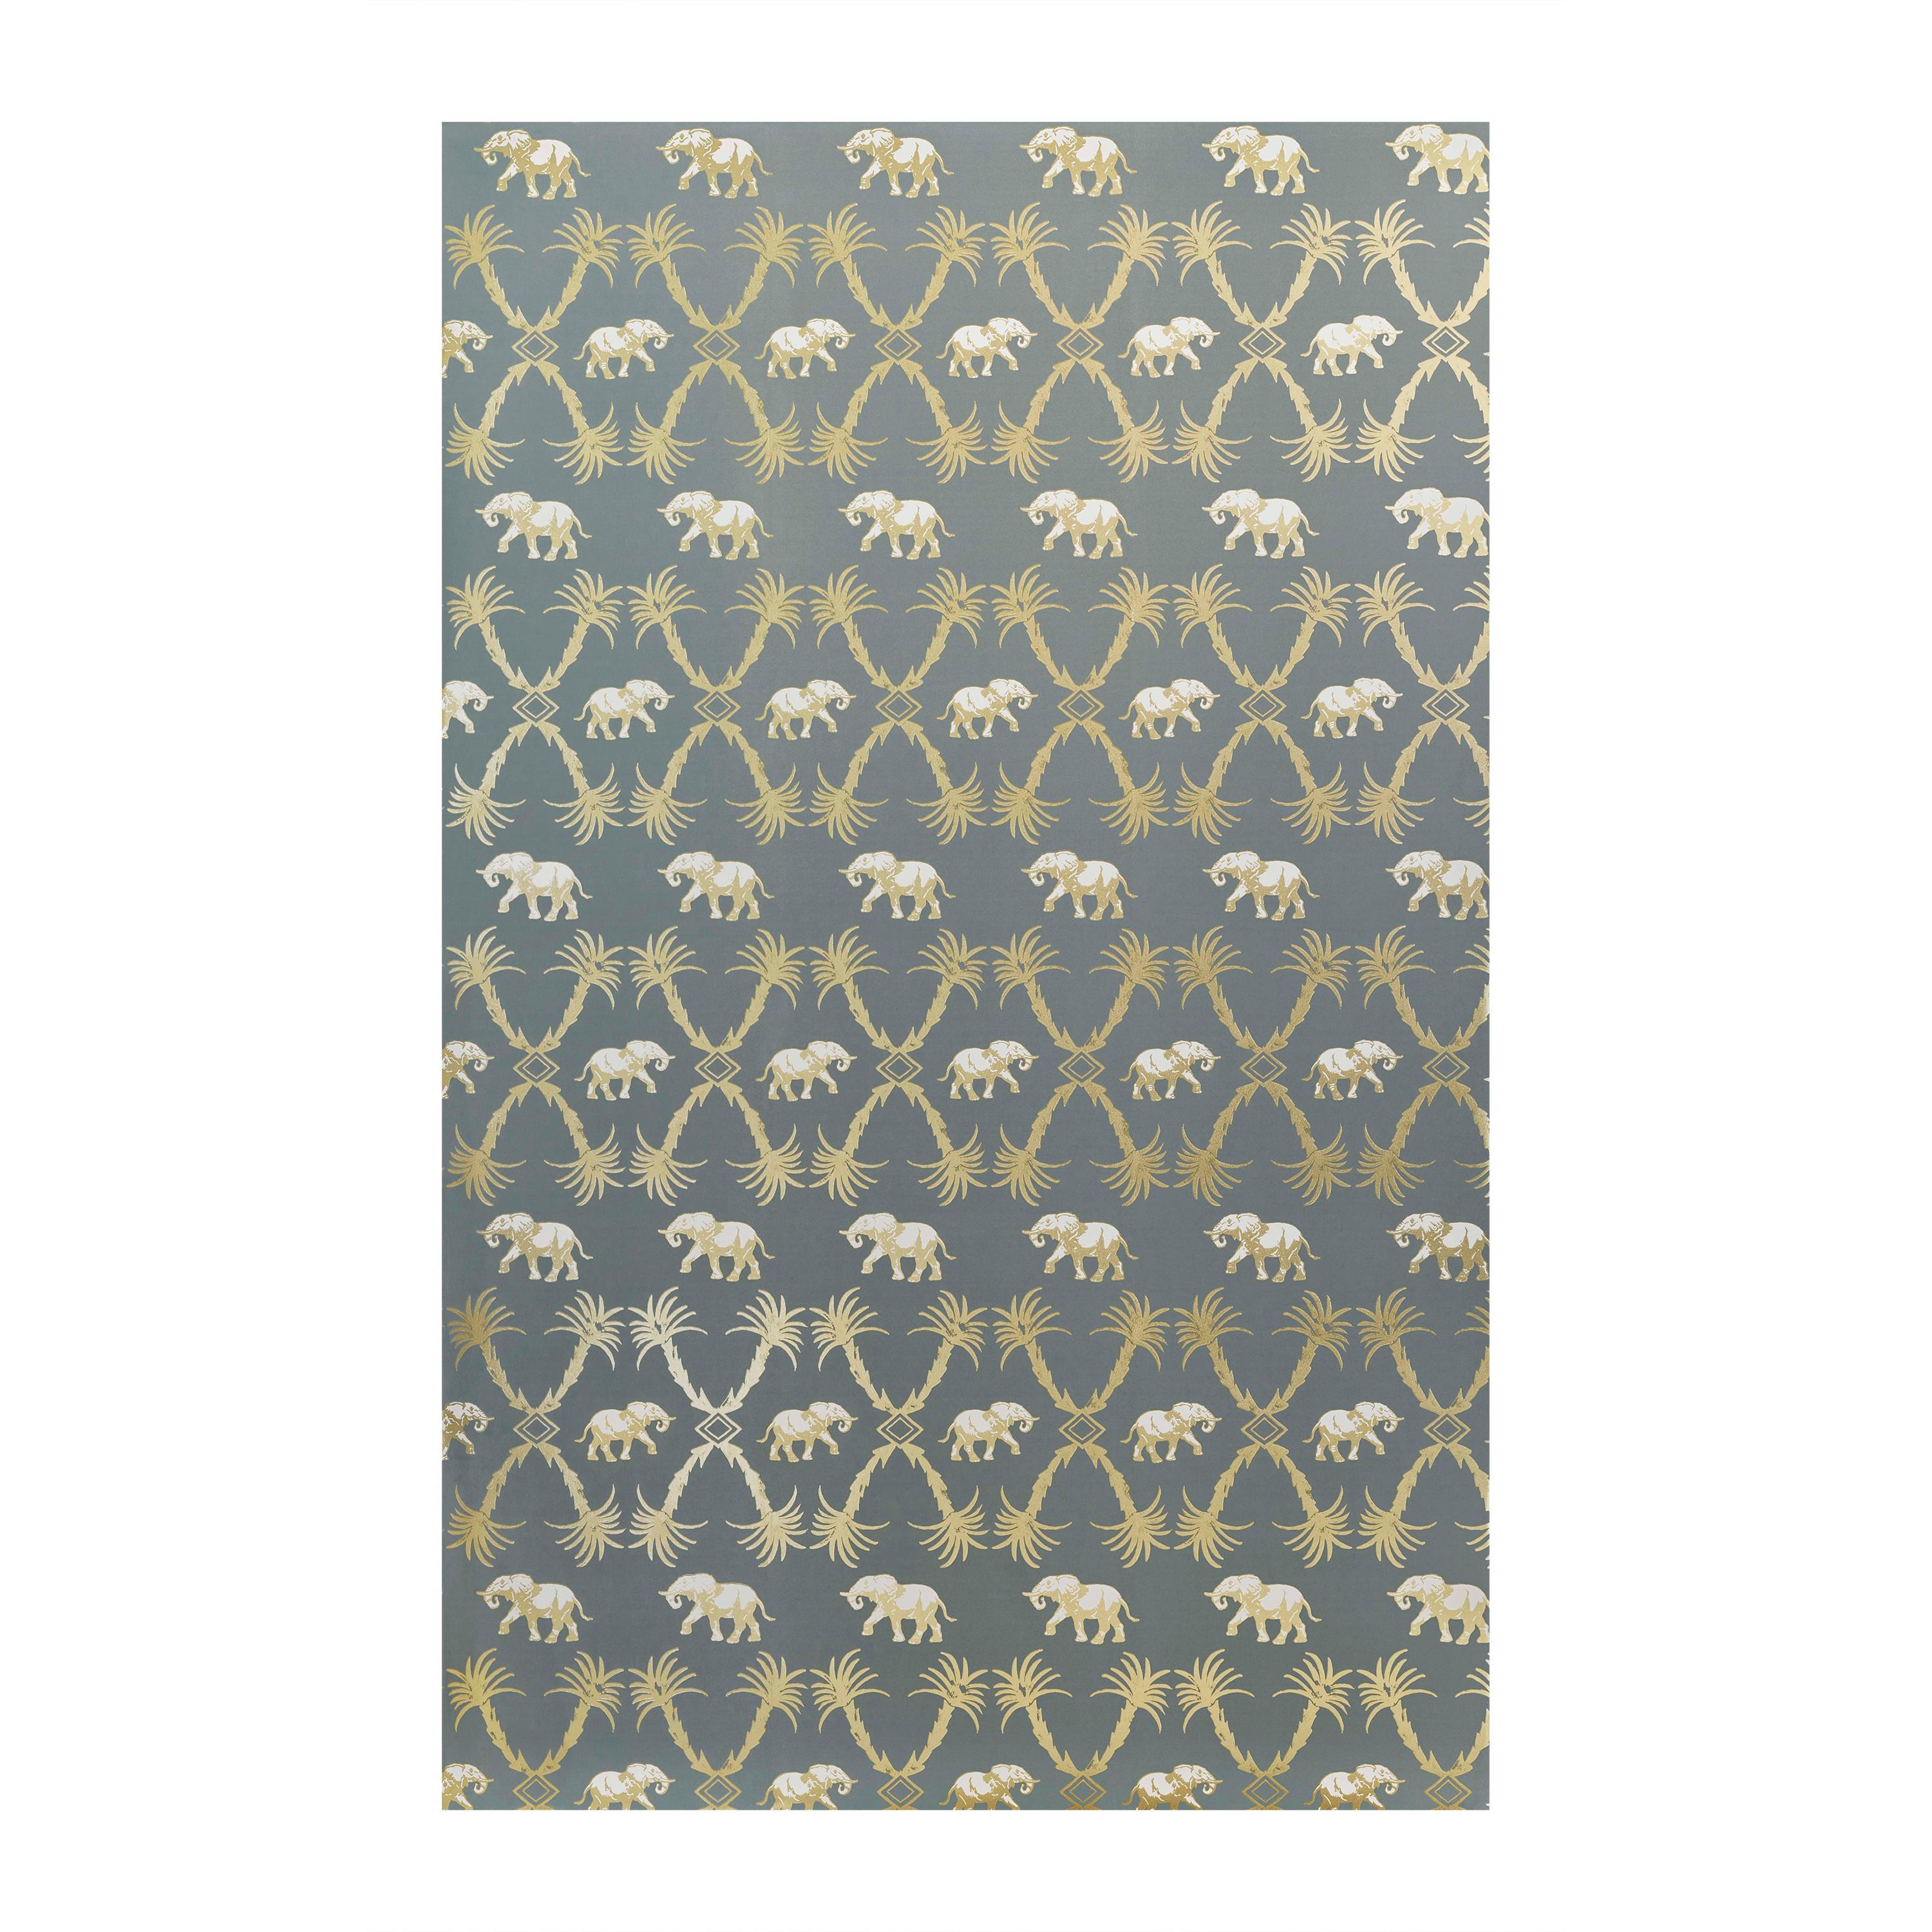 'Elephant Palm' Contemporary, Traditional Wallpaper in Gunmetal/Gold For Sale